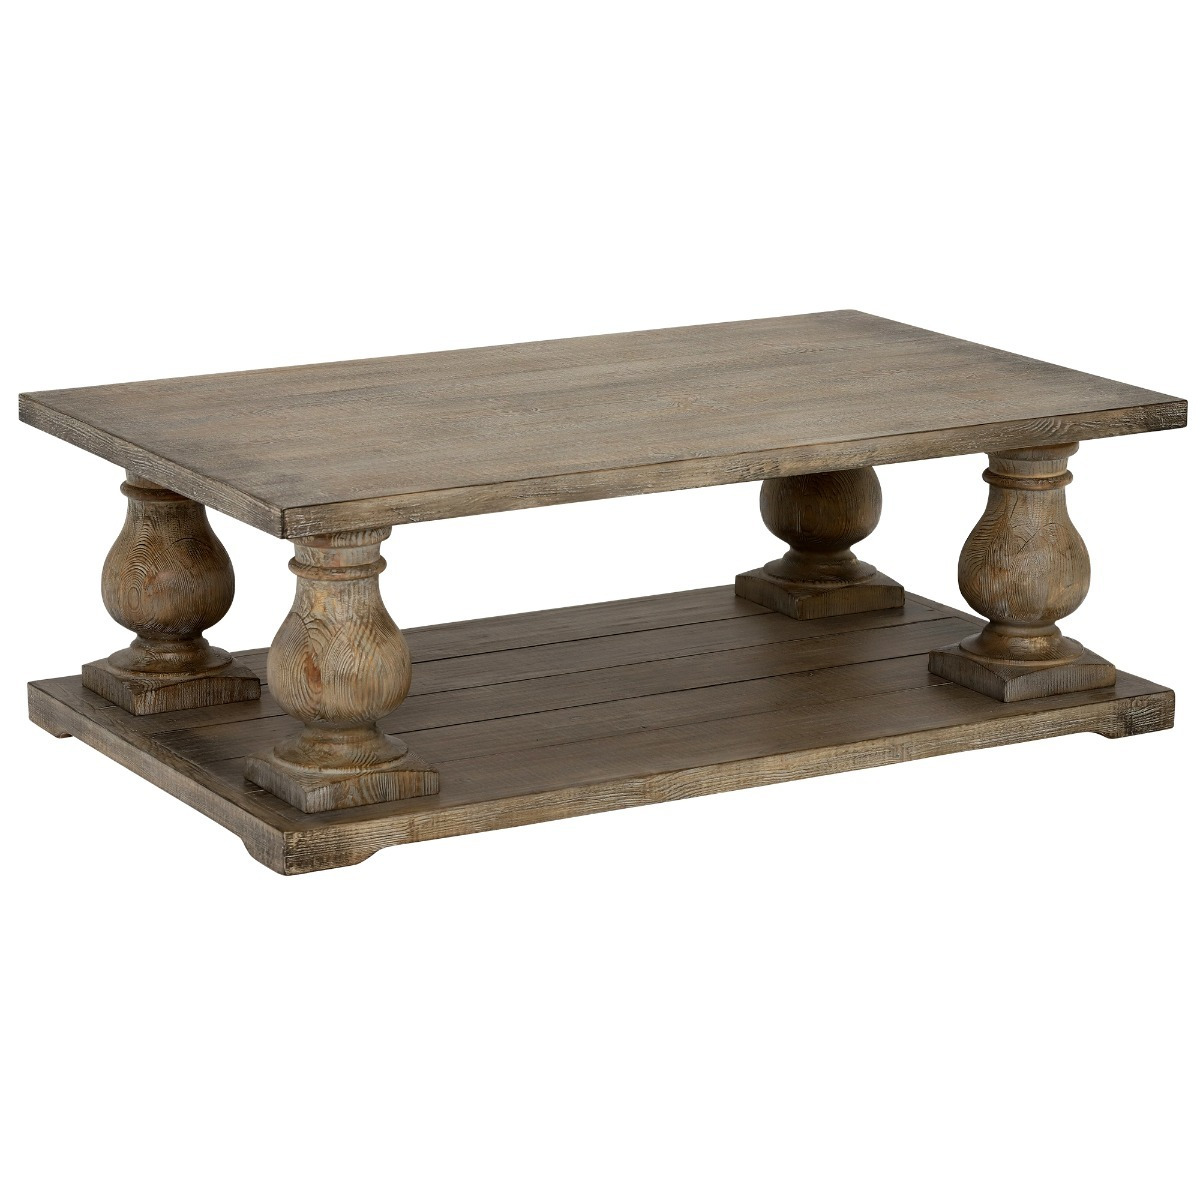 Woolton Coffee Table, Pine Wood - Barker & Stonehouse - image 1